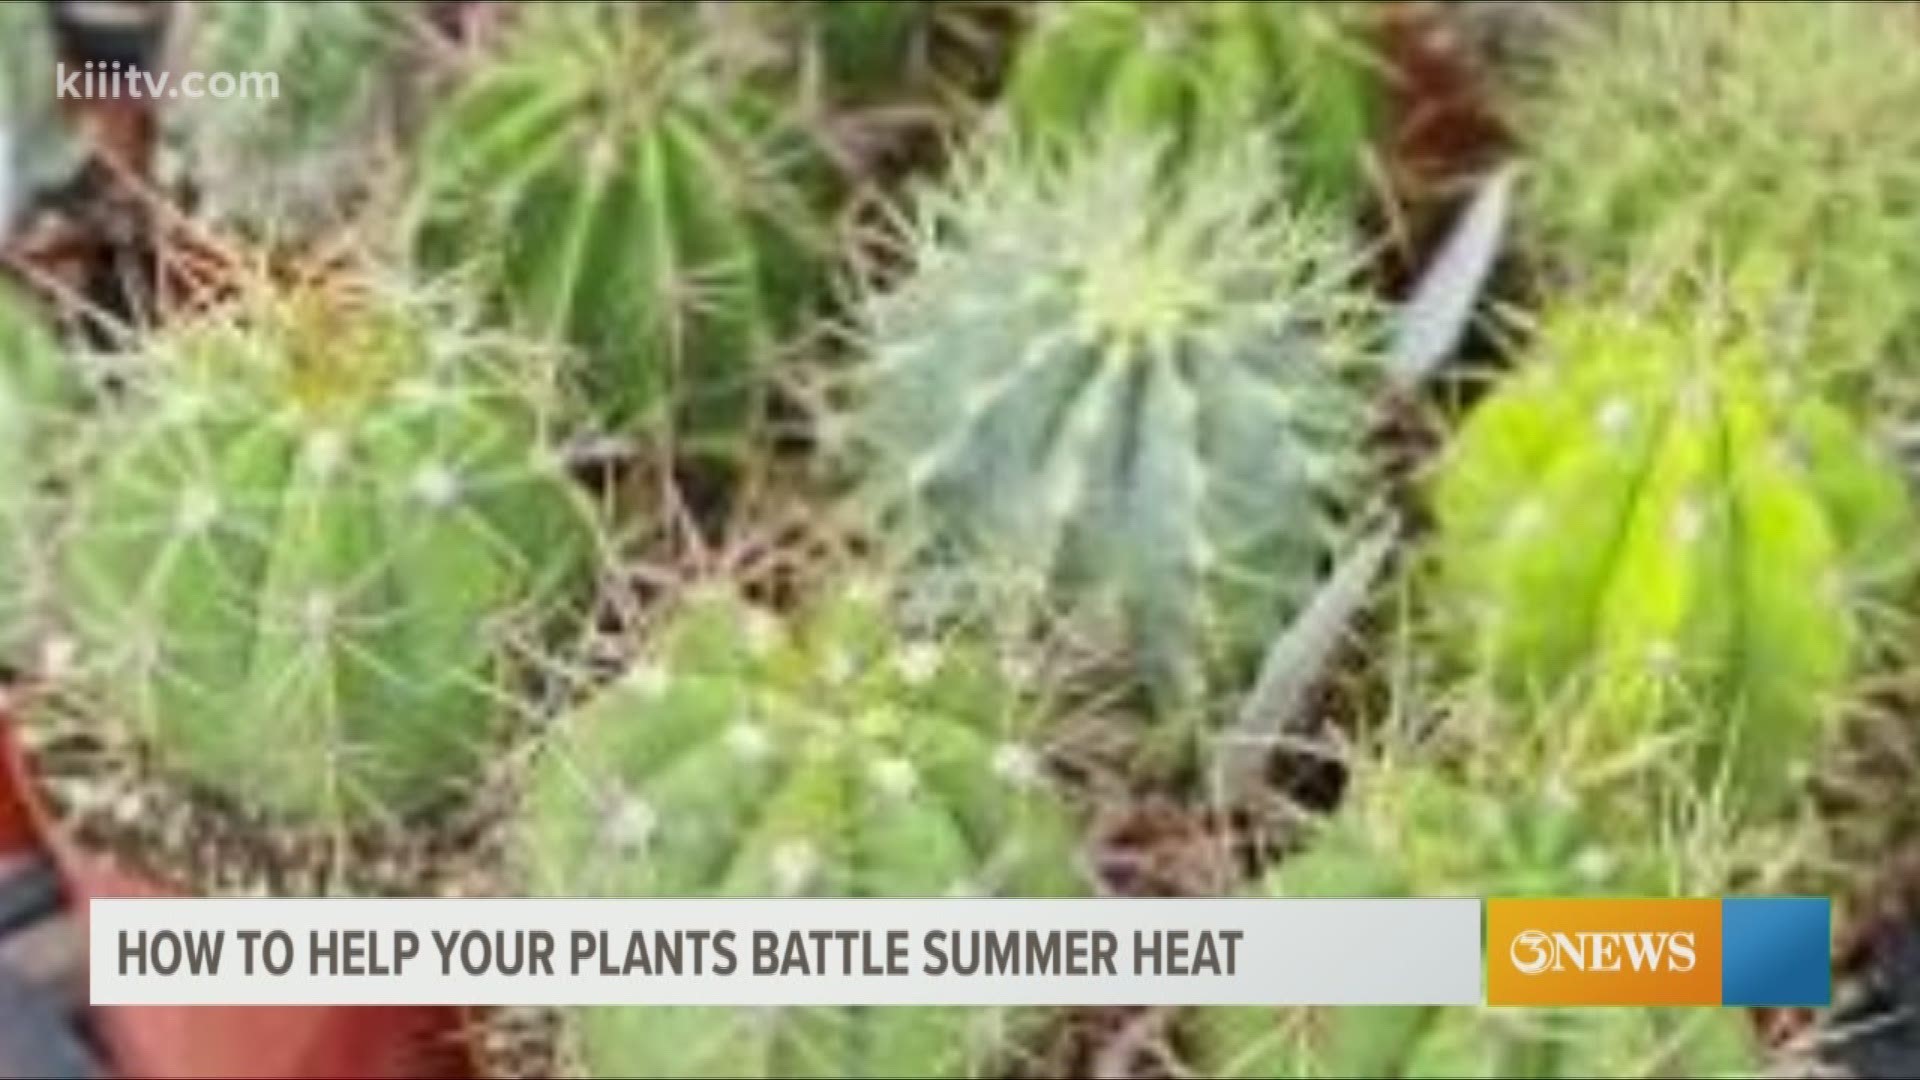 How to keep your garden alive during hot weather